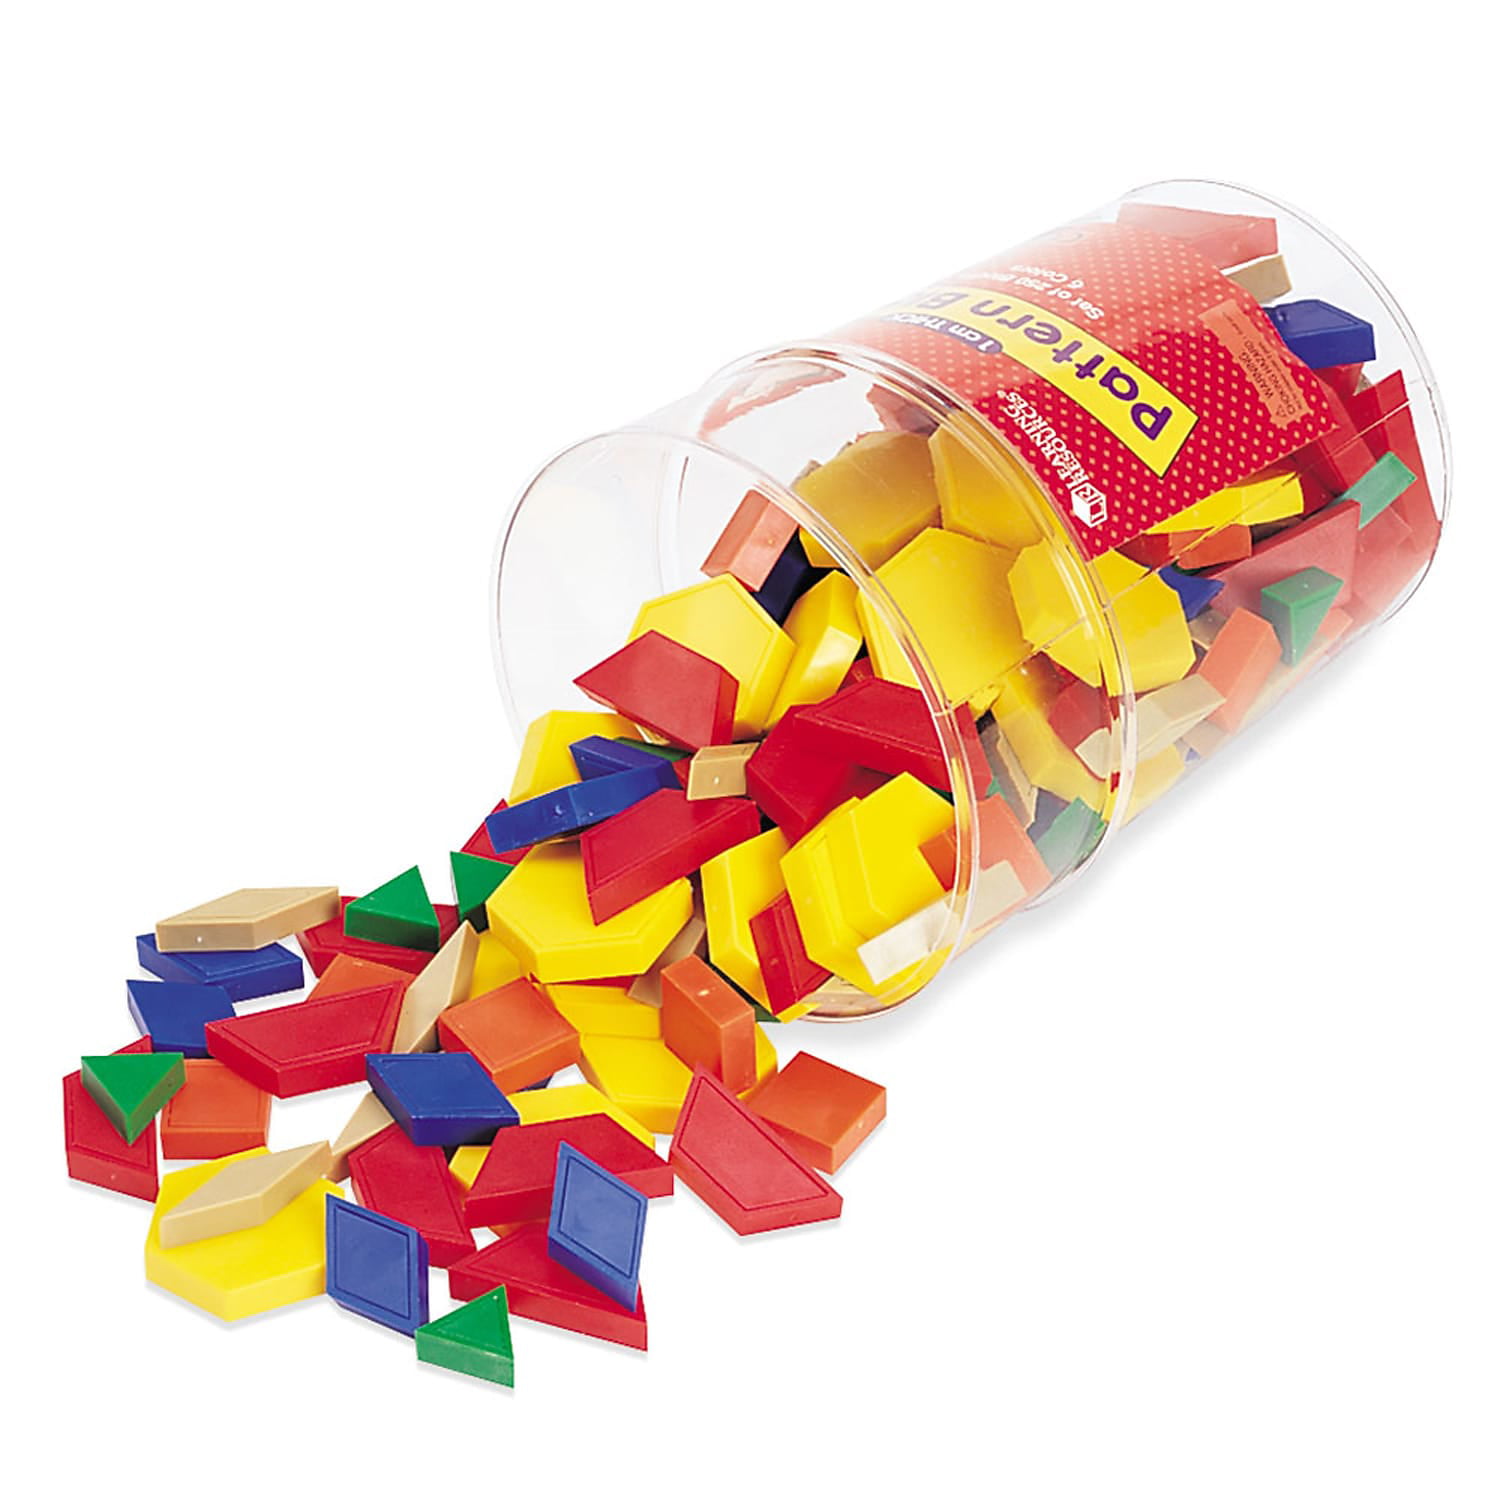 Learning Resources LER7584 Snap Cubes Set of 100 Multicolor for sale online 